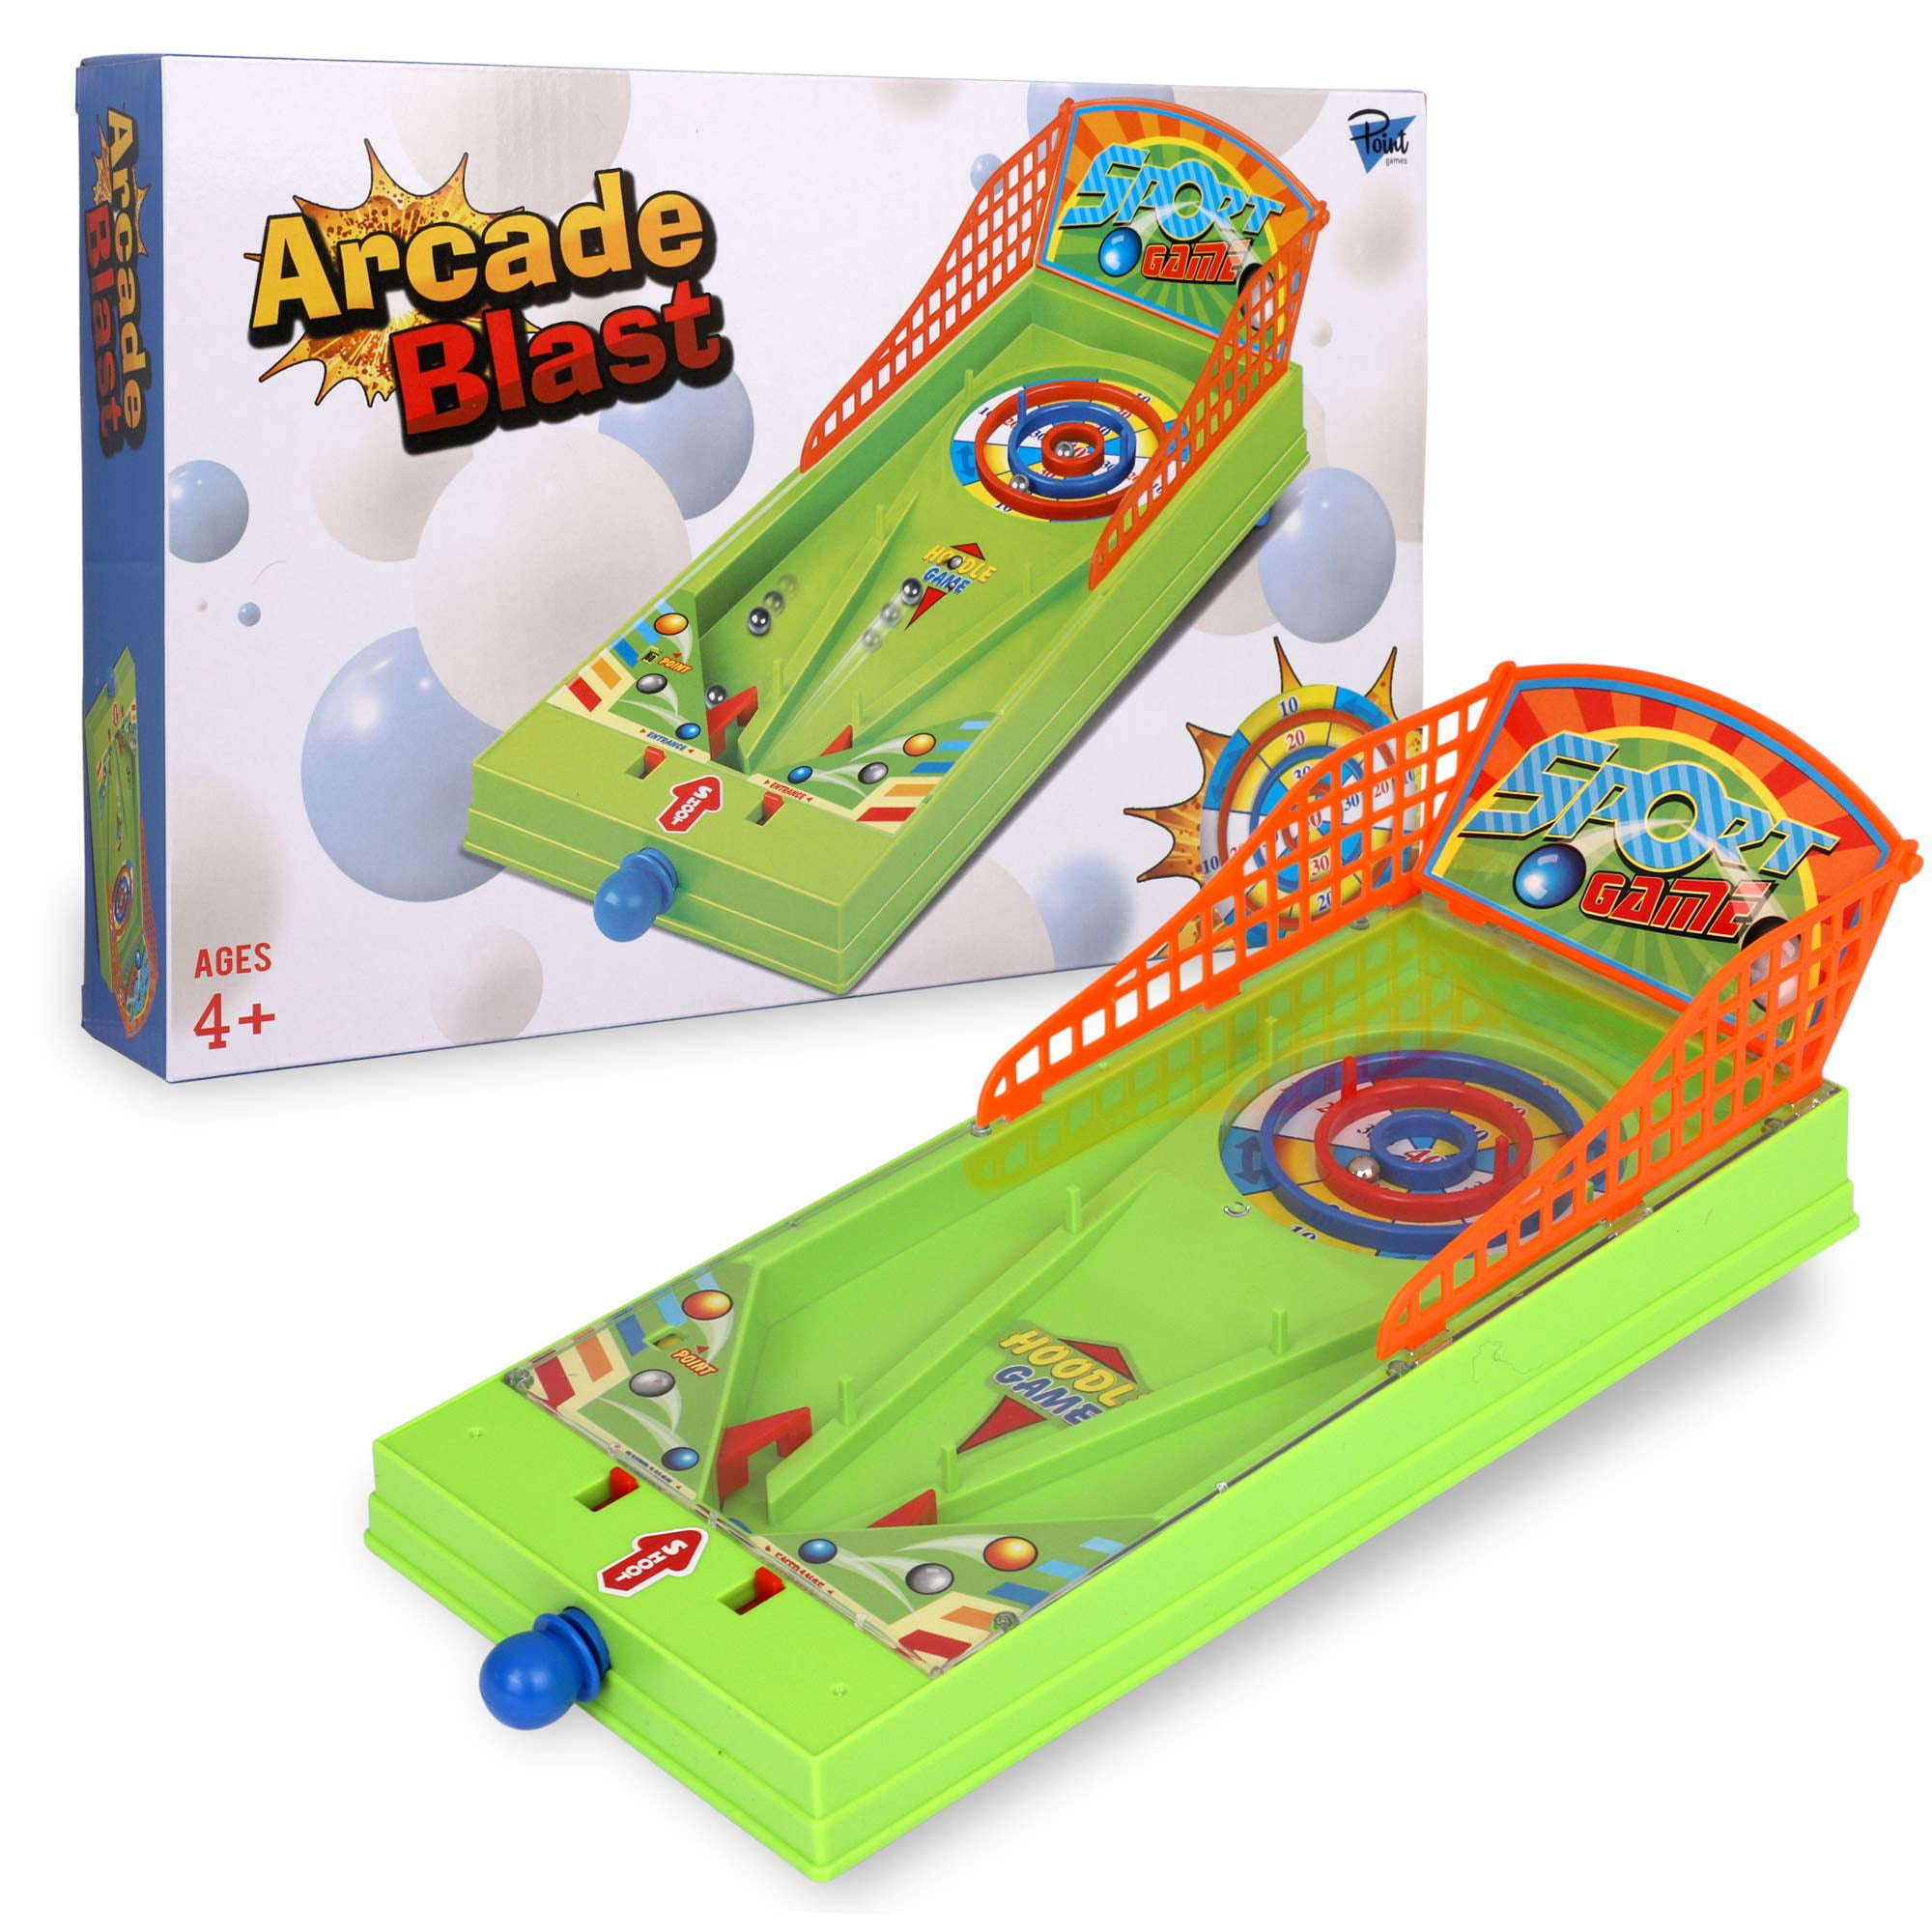 Point Games Arcade Blast - Miniature Tabletop Sports Shooting Arcade Game - Self-Contained and Safe Arcade Toy - Small Board Game- Shooting Machine for Kids